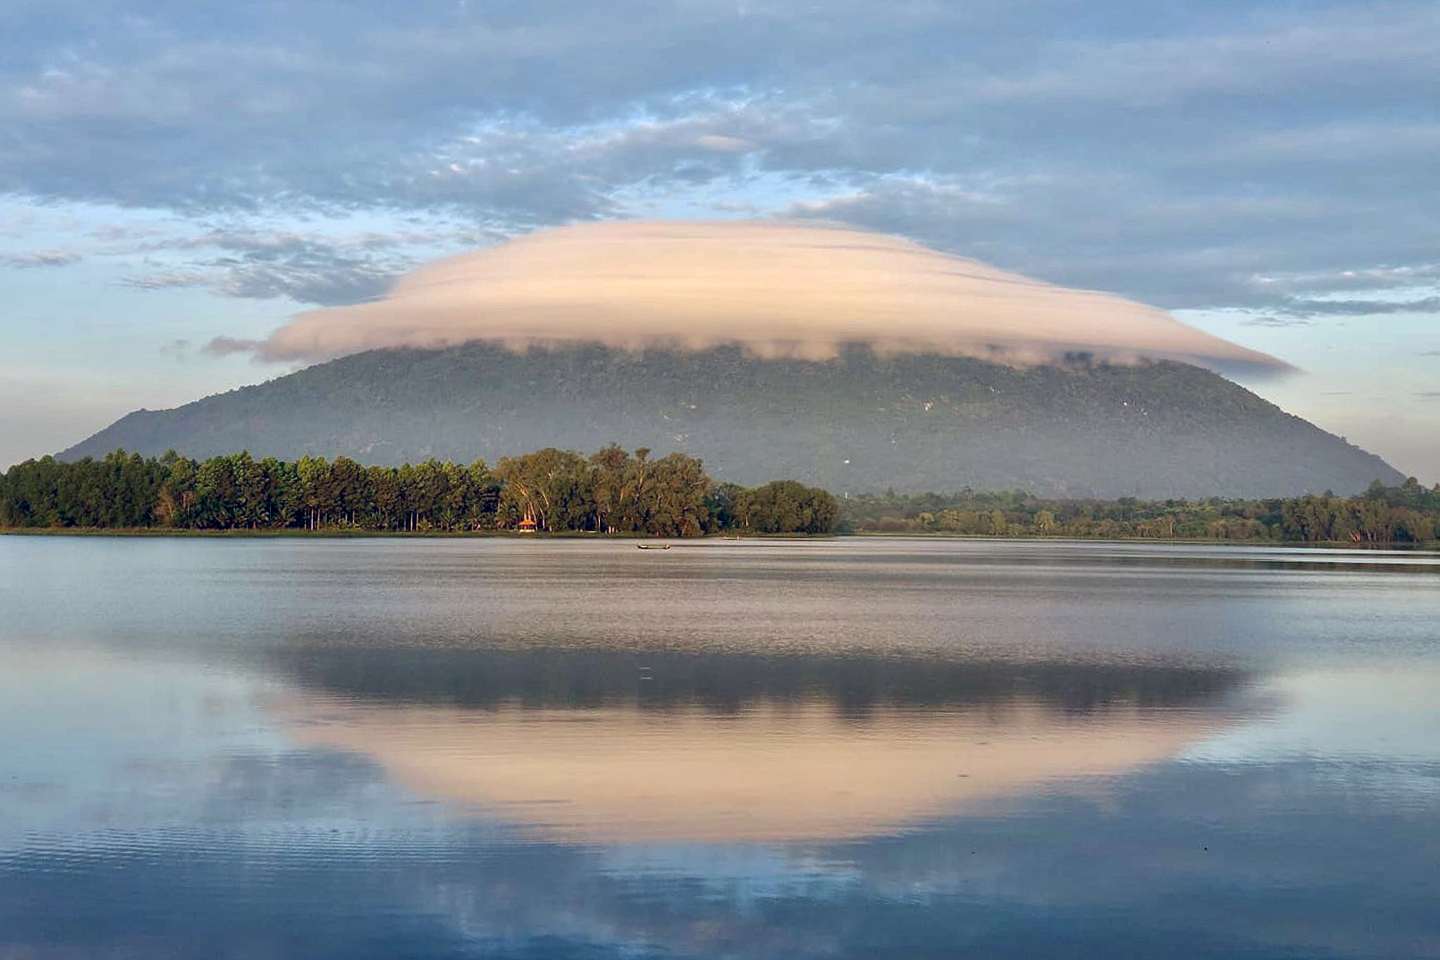 Flying saucer-shaped clouds float above another mountain in southern Vietnam